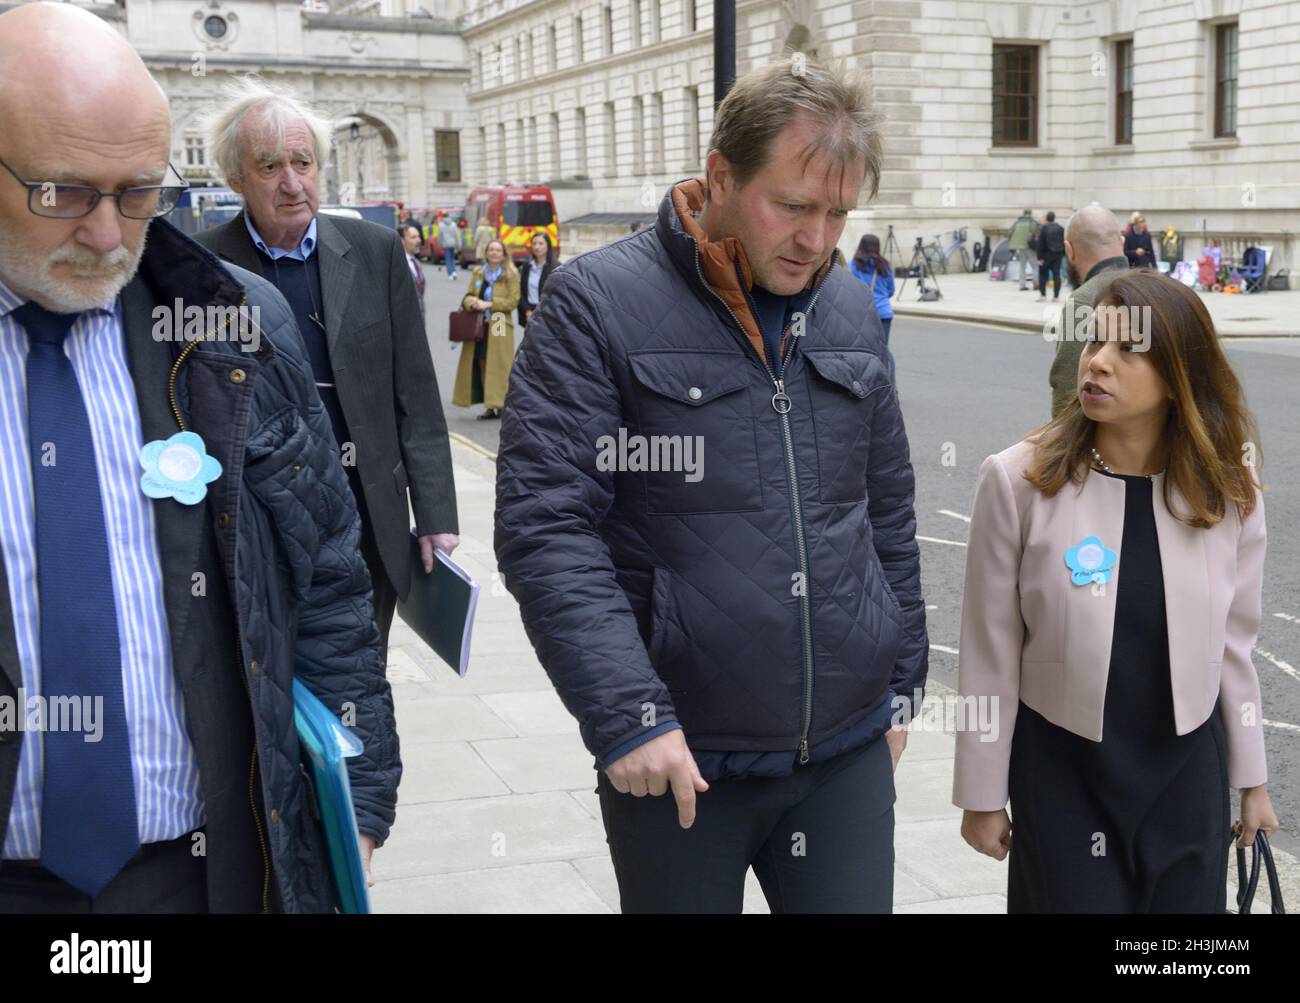 Richard Ratcliffe - husband of Nazanin Zaghari-Ratcliffe, detained in Iran - with Tulip Siddiq MP, on his way to meet with Foreign Secretary Liz Truss Stock Photo